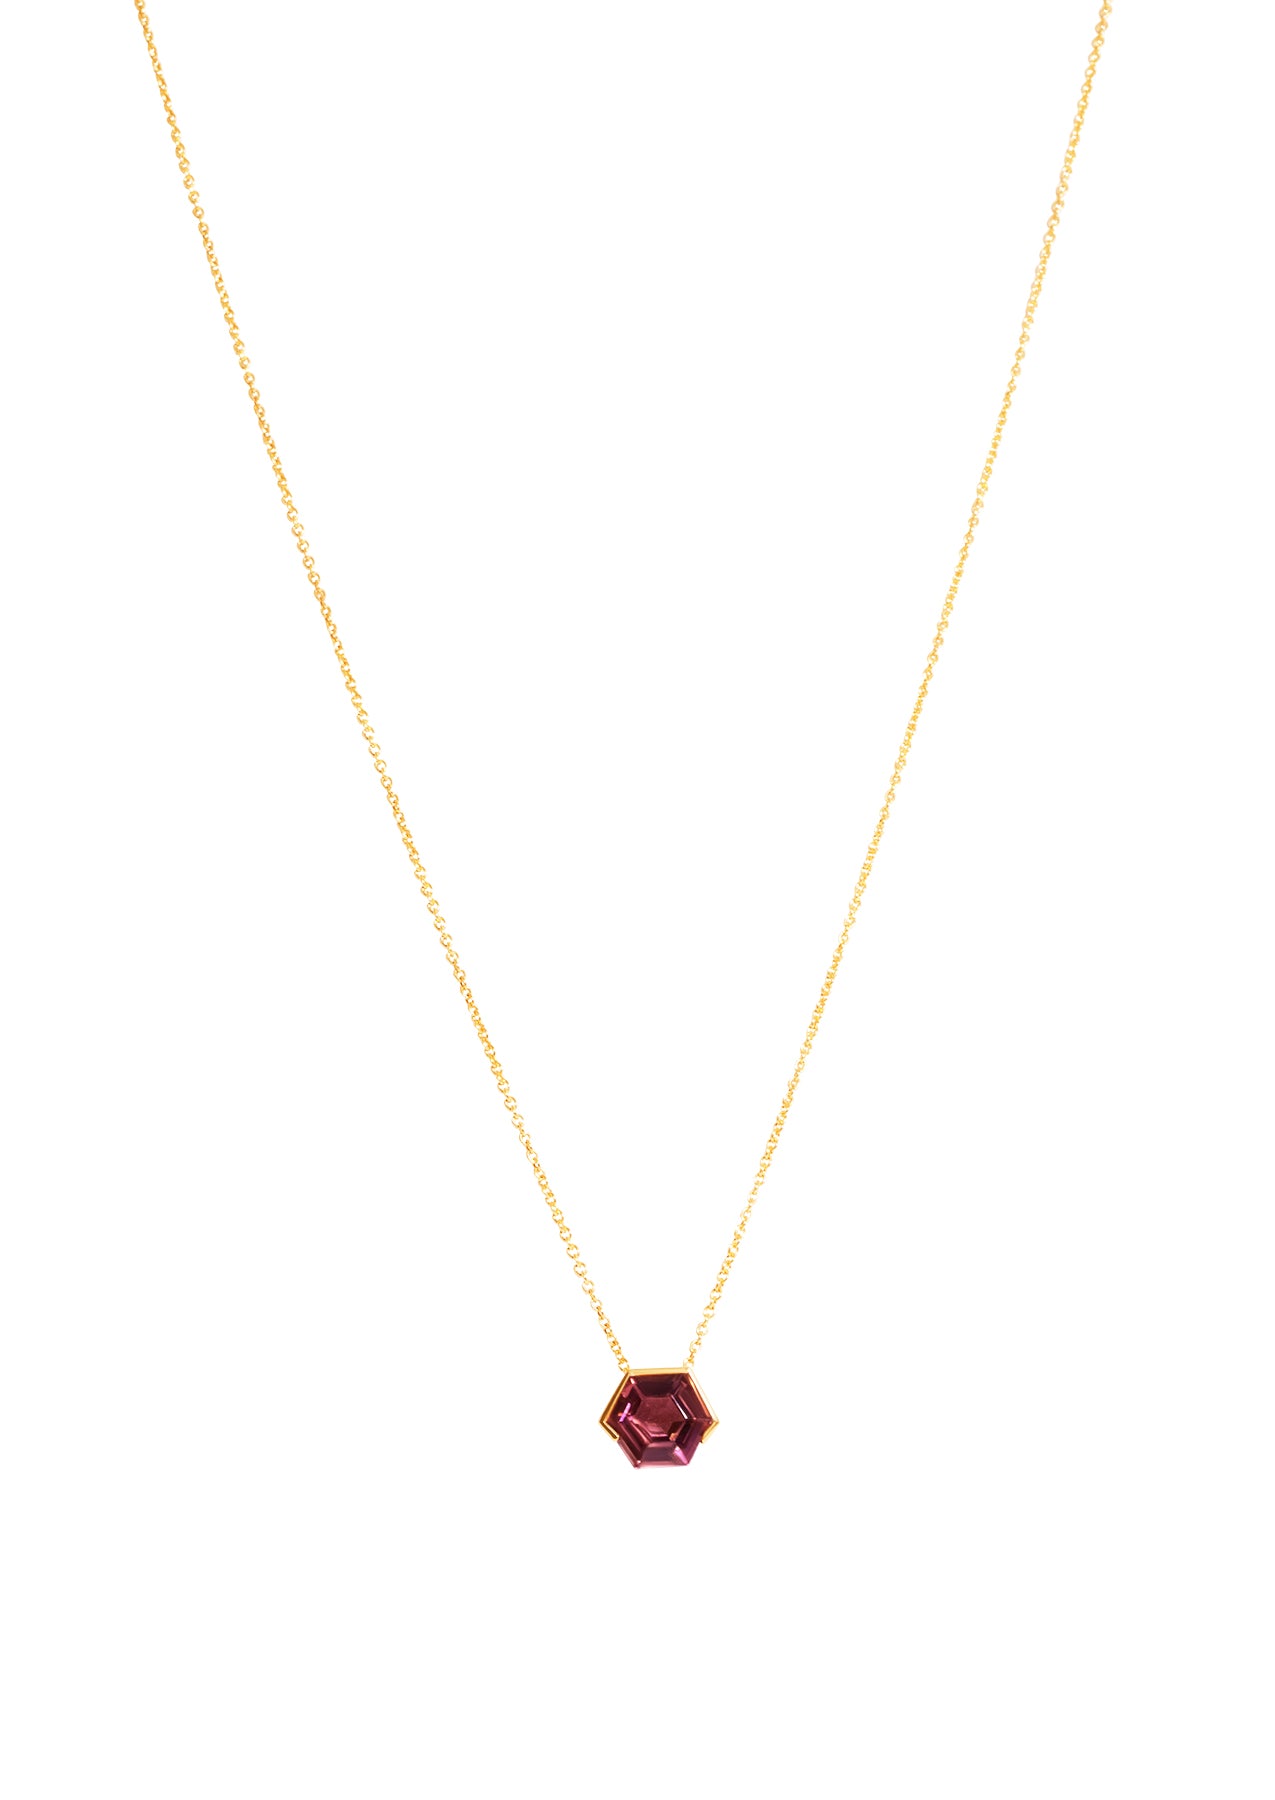 The Ottilie Necklace with 2.85ct Peach Tourmaline